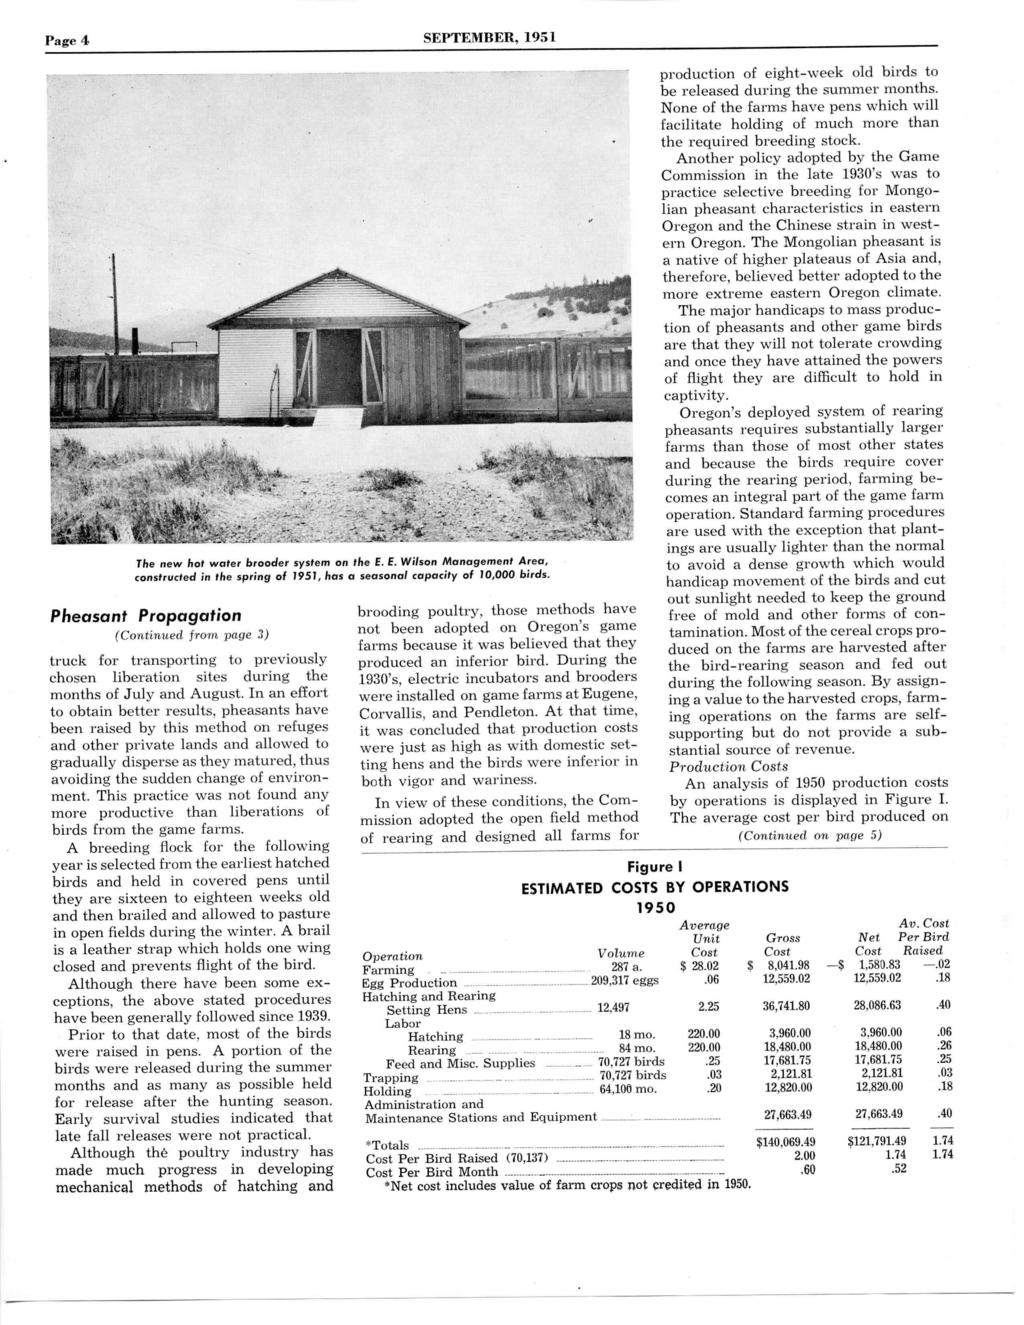 Page 4 SEPTEMBER, 1951 The new hot water brooder system on the E. E. Wilson Management Area, constructed in the spring of 1951, has a seasonal capacity of 10,000 birds.